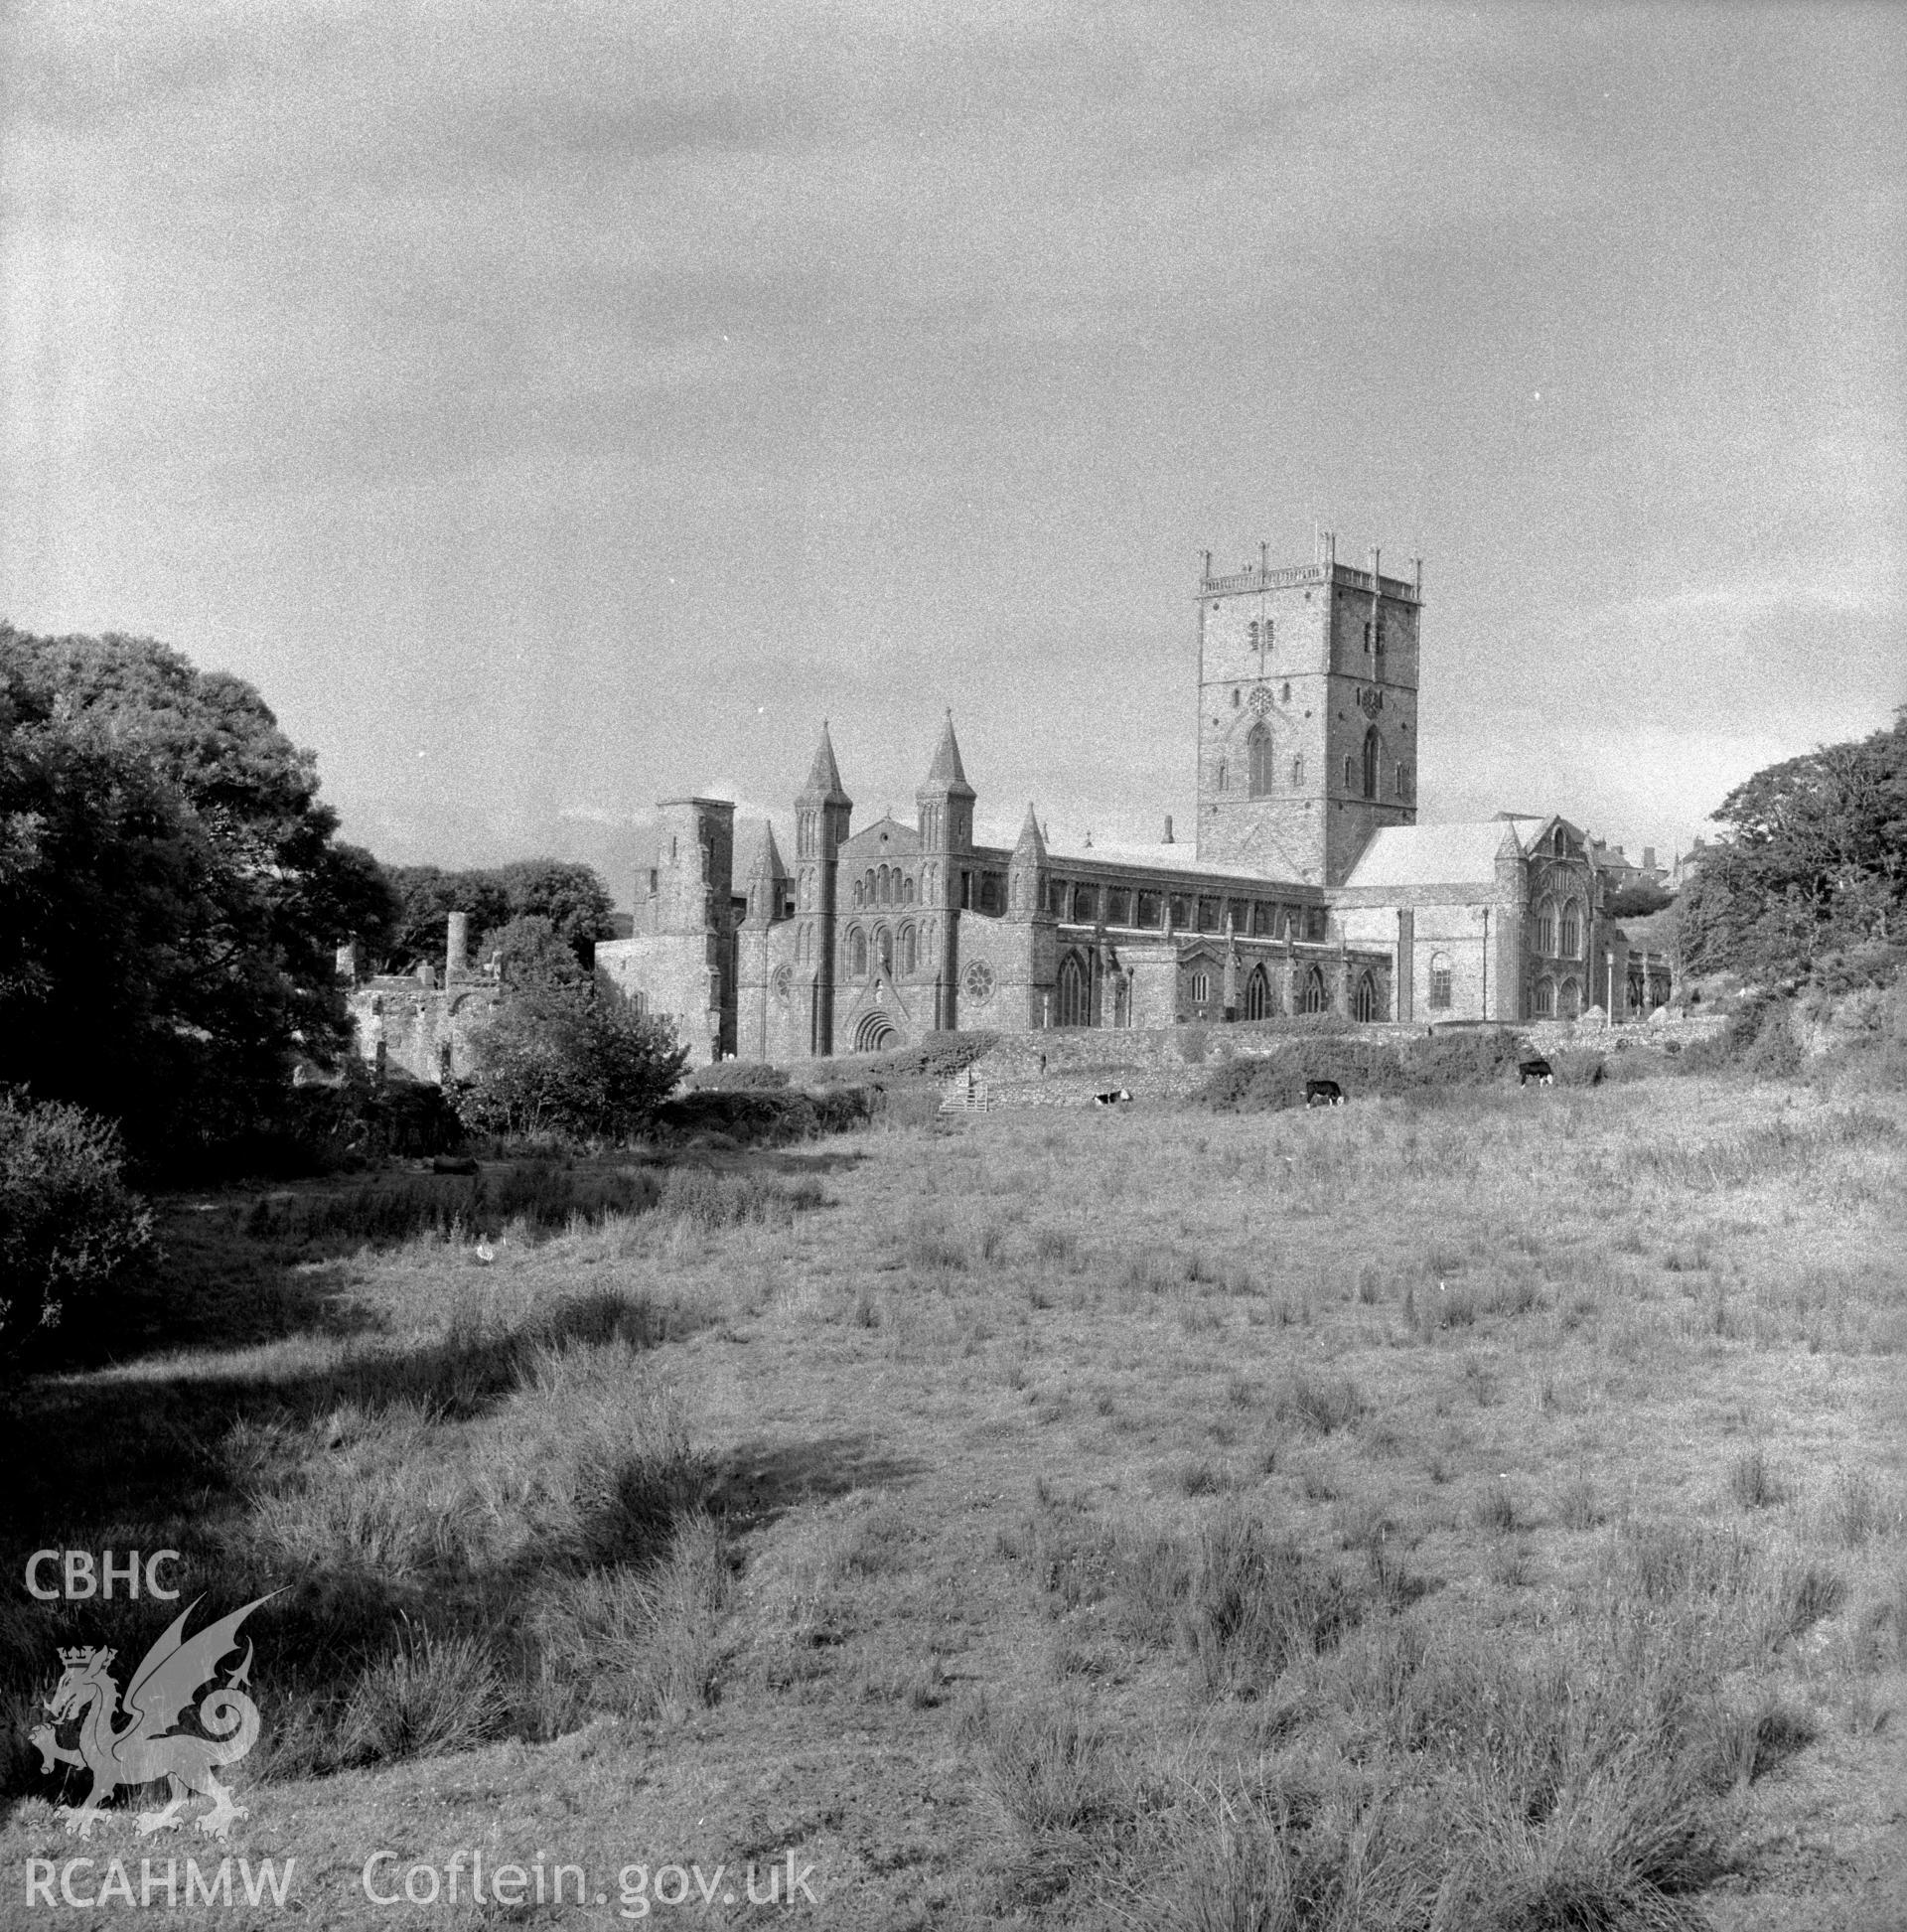 Digital copy of an acetate negative showing St Davids Cathedral, 15th September 1967.